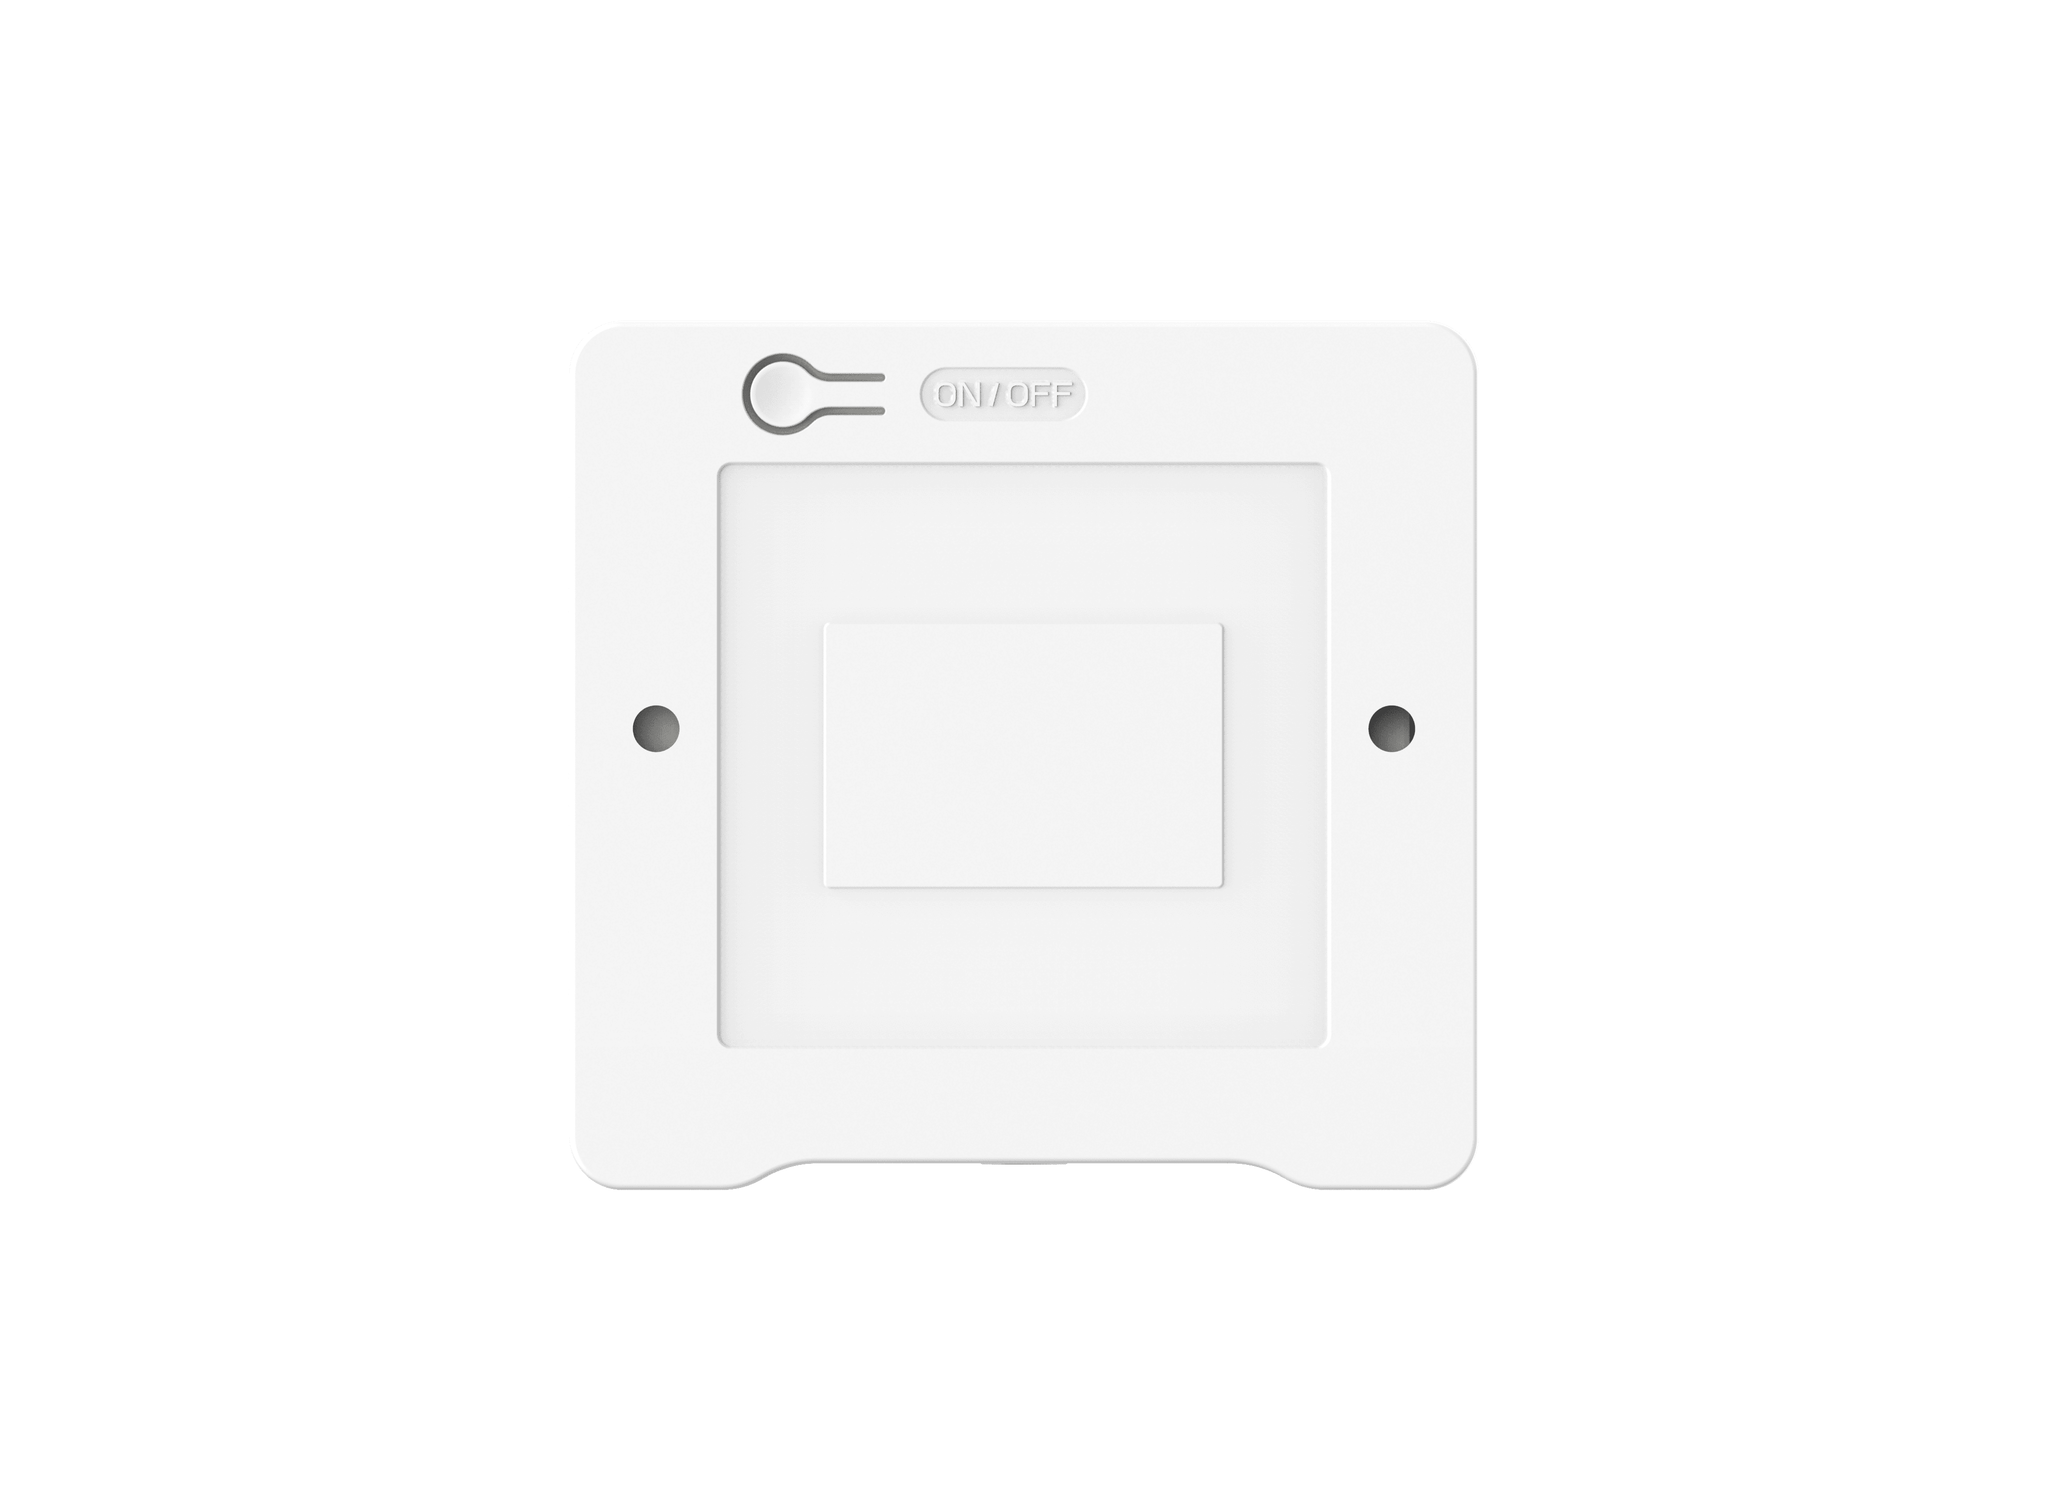 AM103L is a compact indoor ambience monitoring sensor for measurement of temperature, humidity and CO2